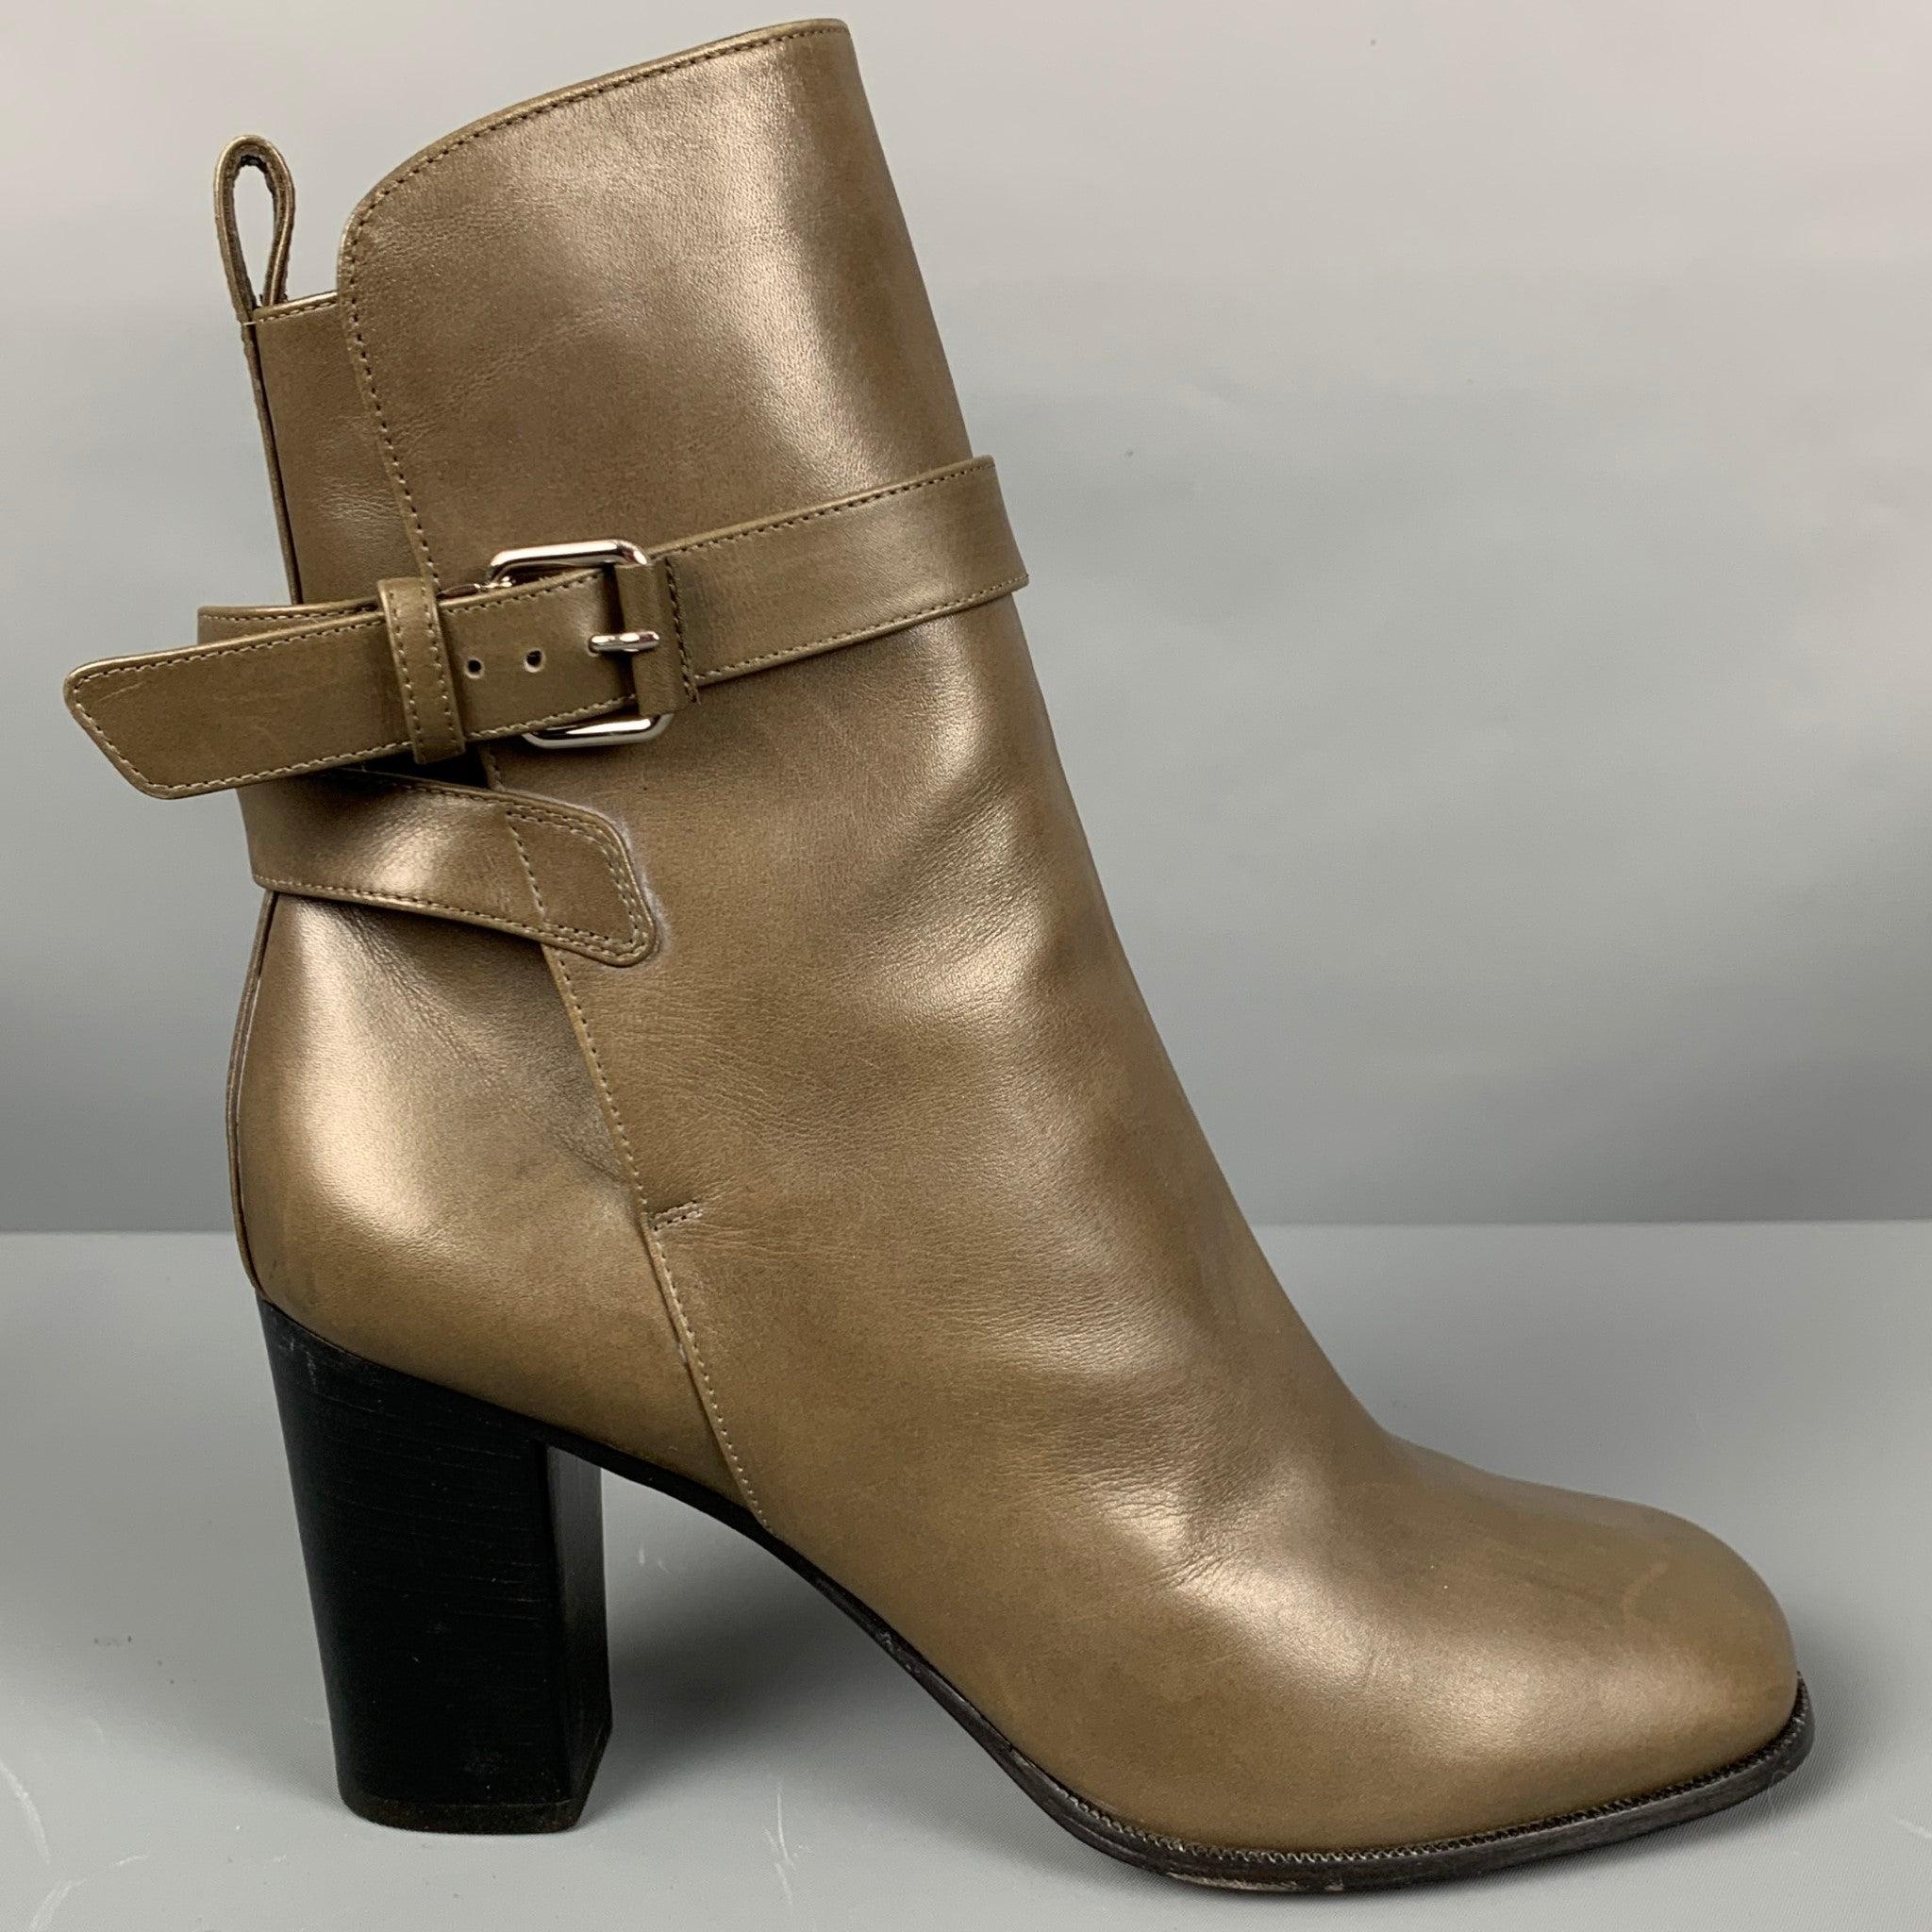 CELINE
boots in a grey leather fabric featuring ankle strap with silver tone hardware, and chunky heel. Made in Italy.Very Good Pre-Owned Condition. Minor signs of wear. 

Marked:   40 

Measurements: 
  Length: 9.25 inches Width: 3.25 inches